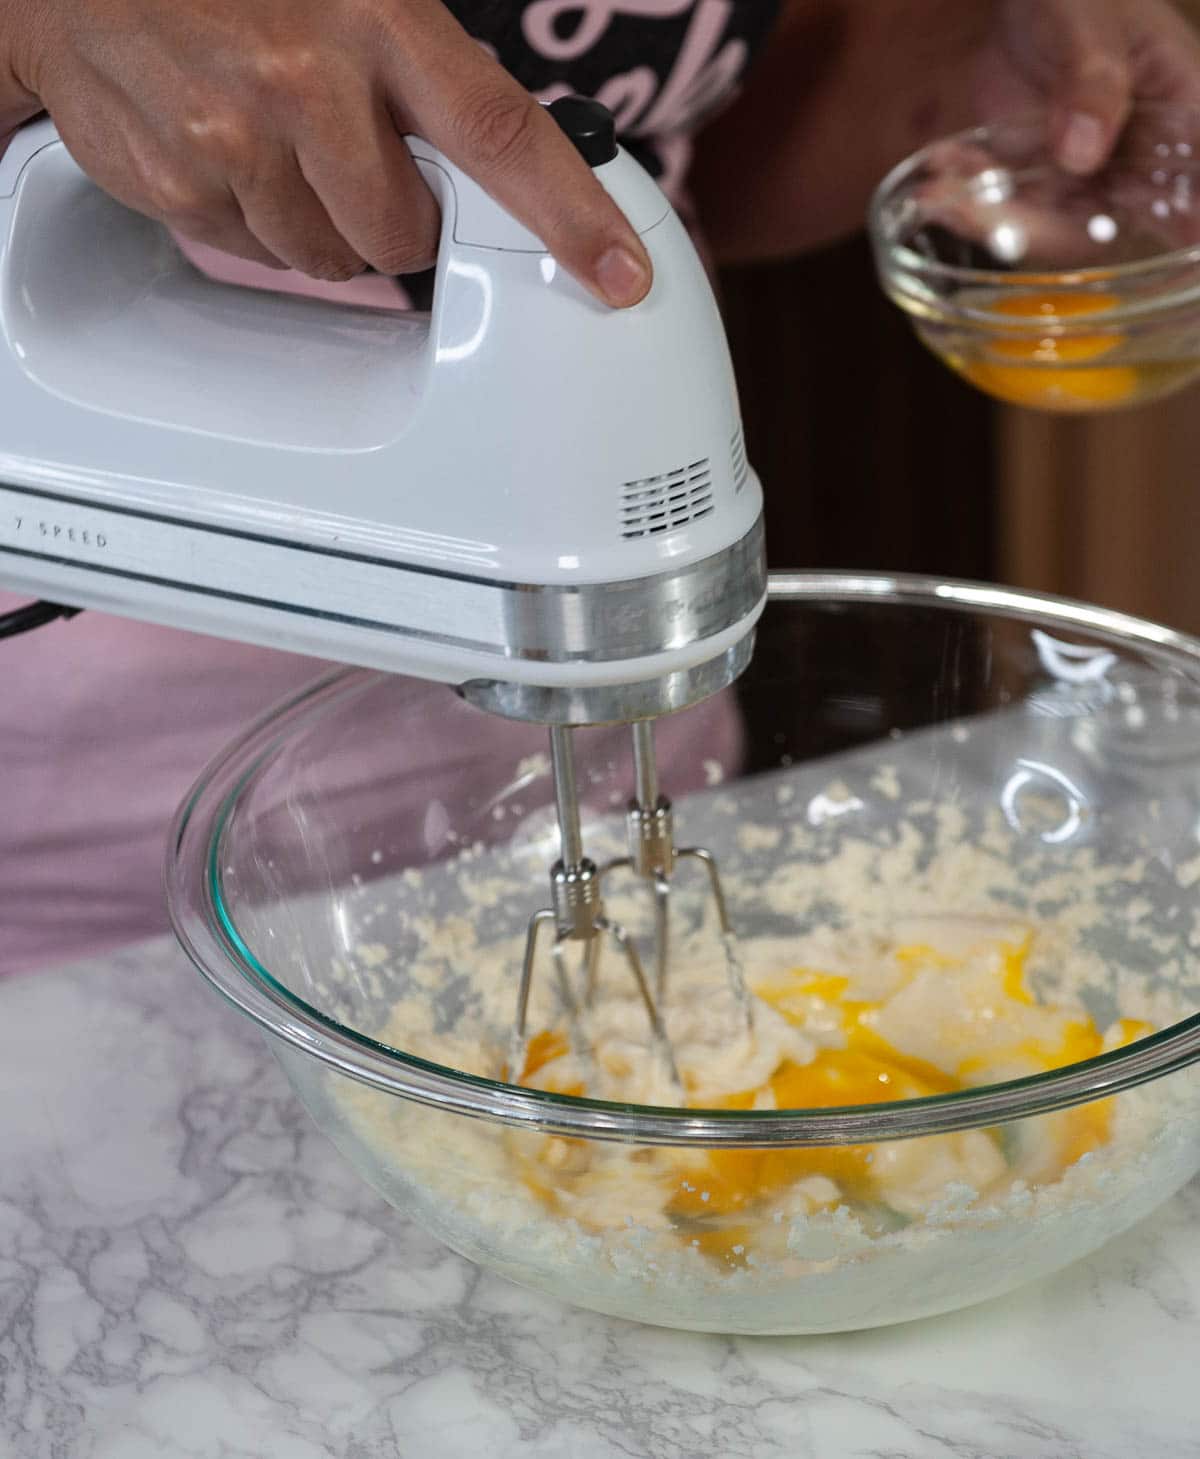 mixing eggs with butter and sugar with a hand mixer in a glass bowl